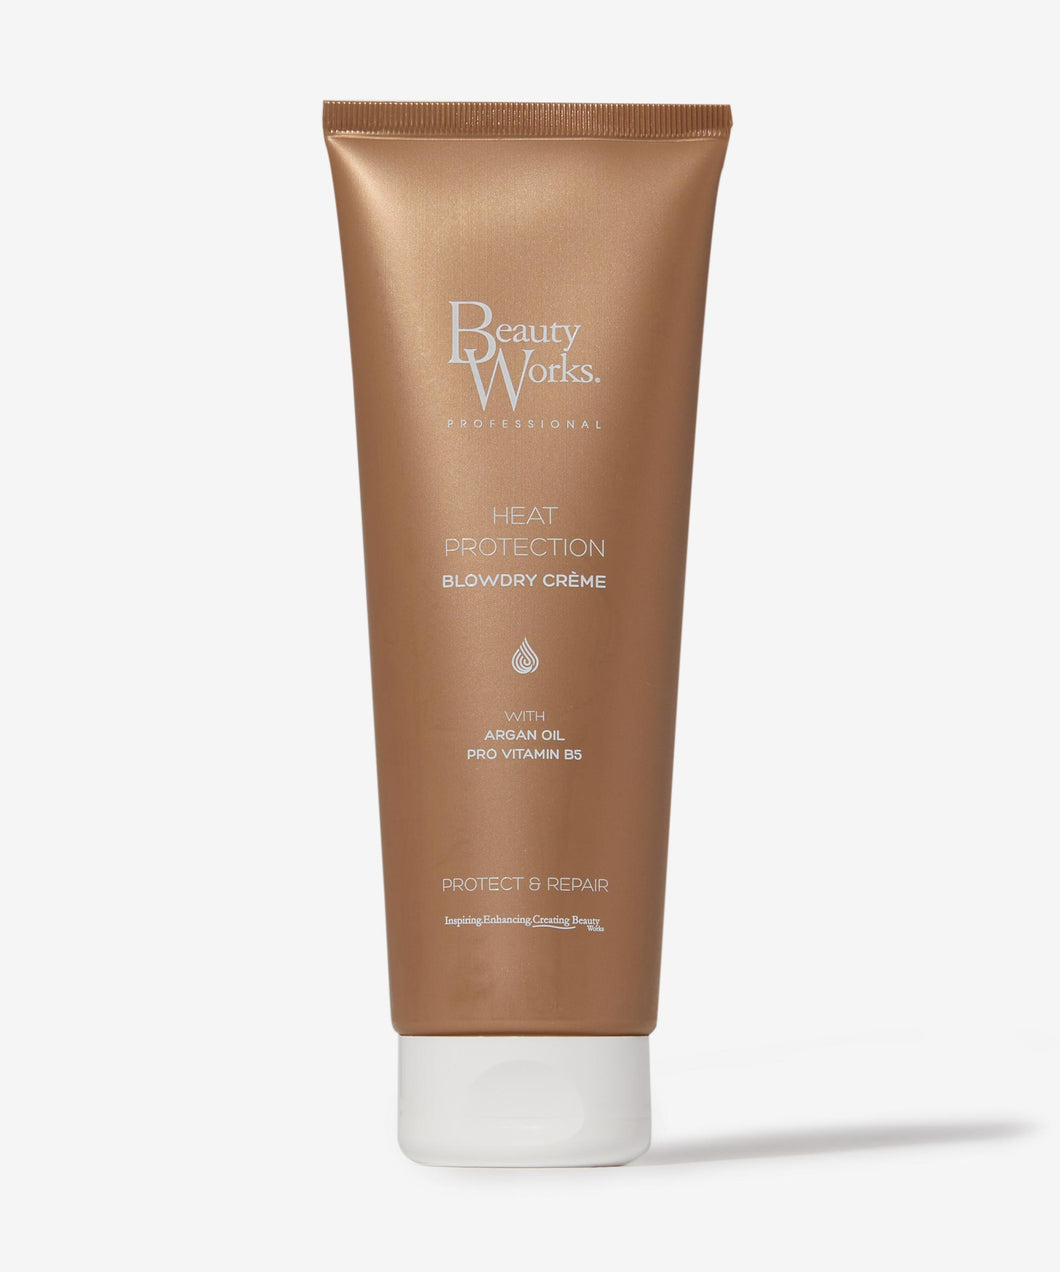 Beauty Works Heat Protection Blow Dry Crème